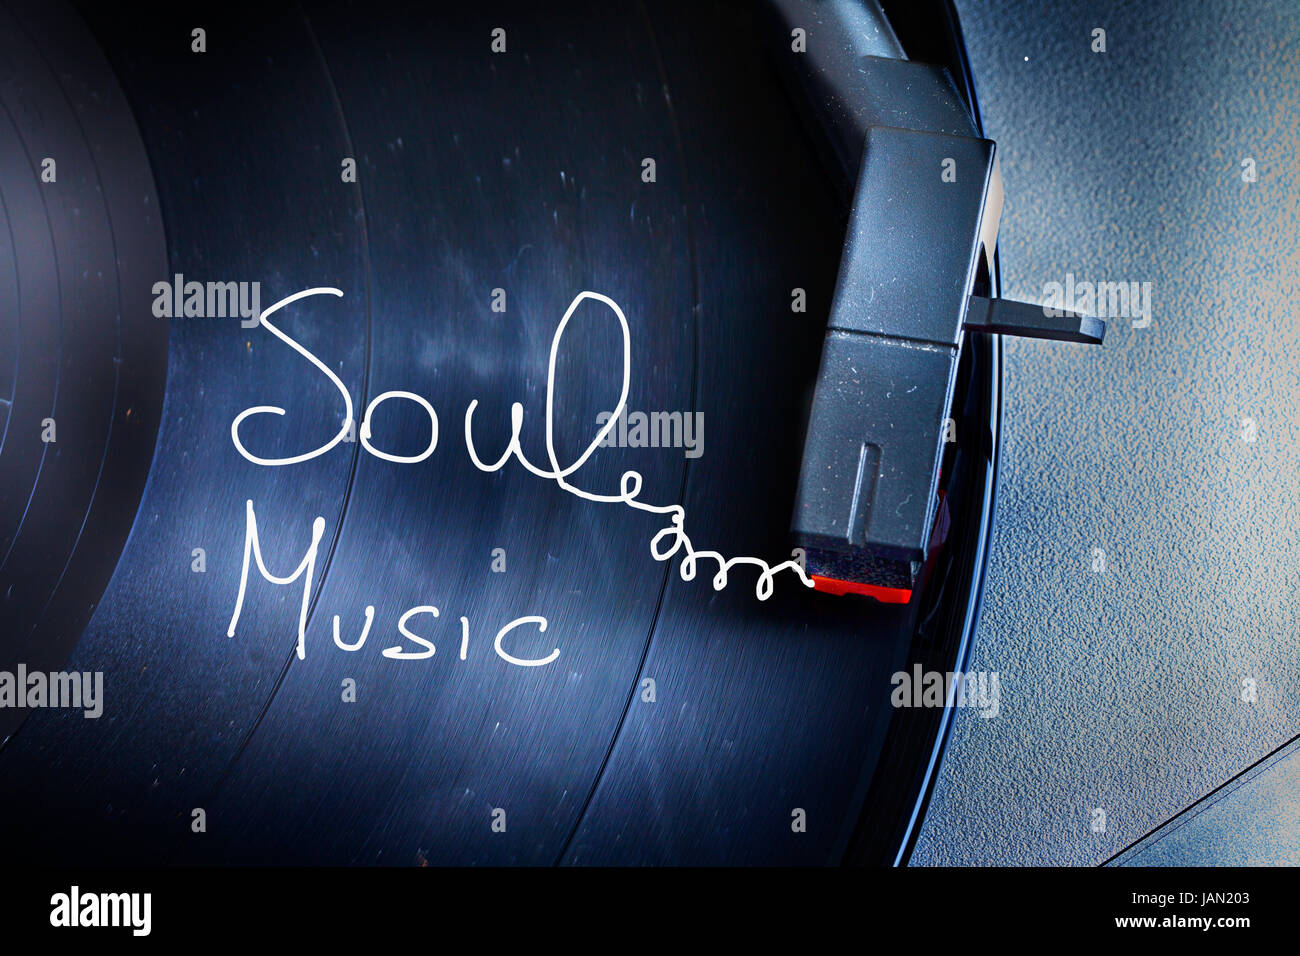 Old and dusty turntable with old vynil seen from above with words 'Soul music' Stock Photo